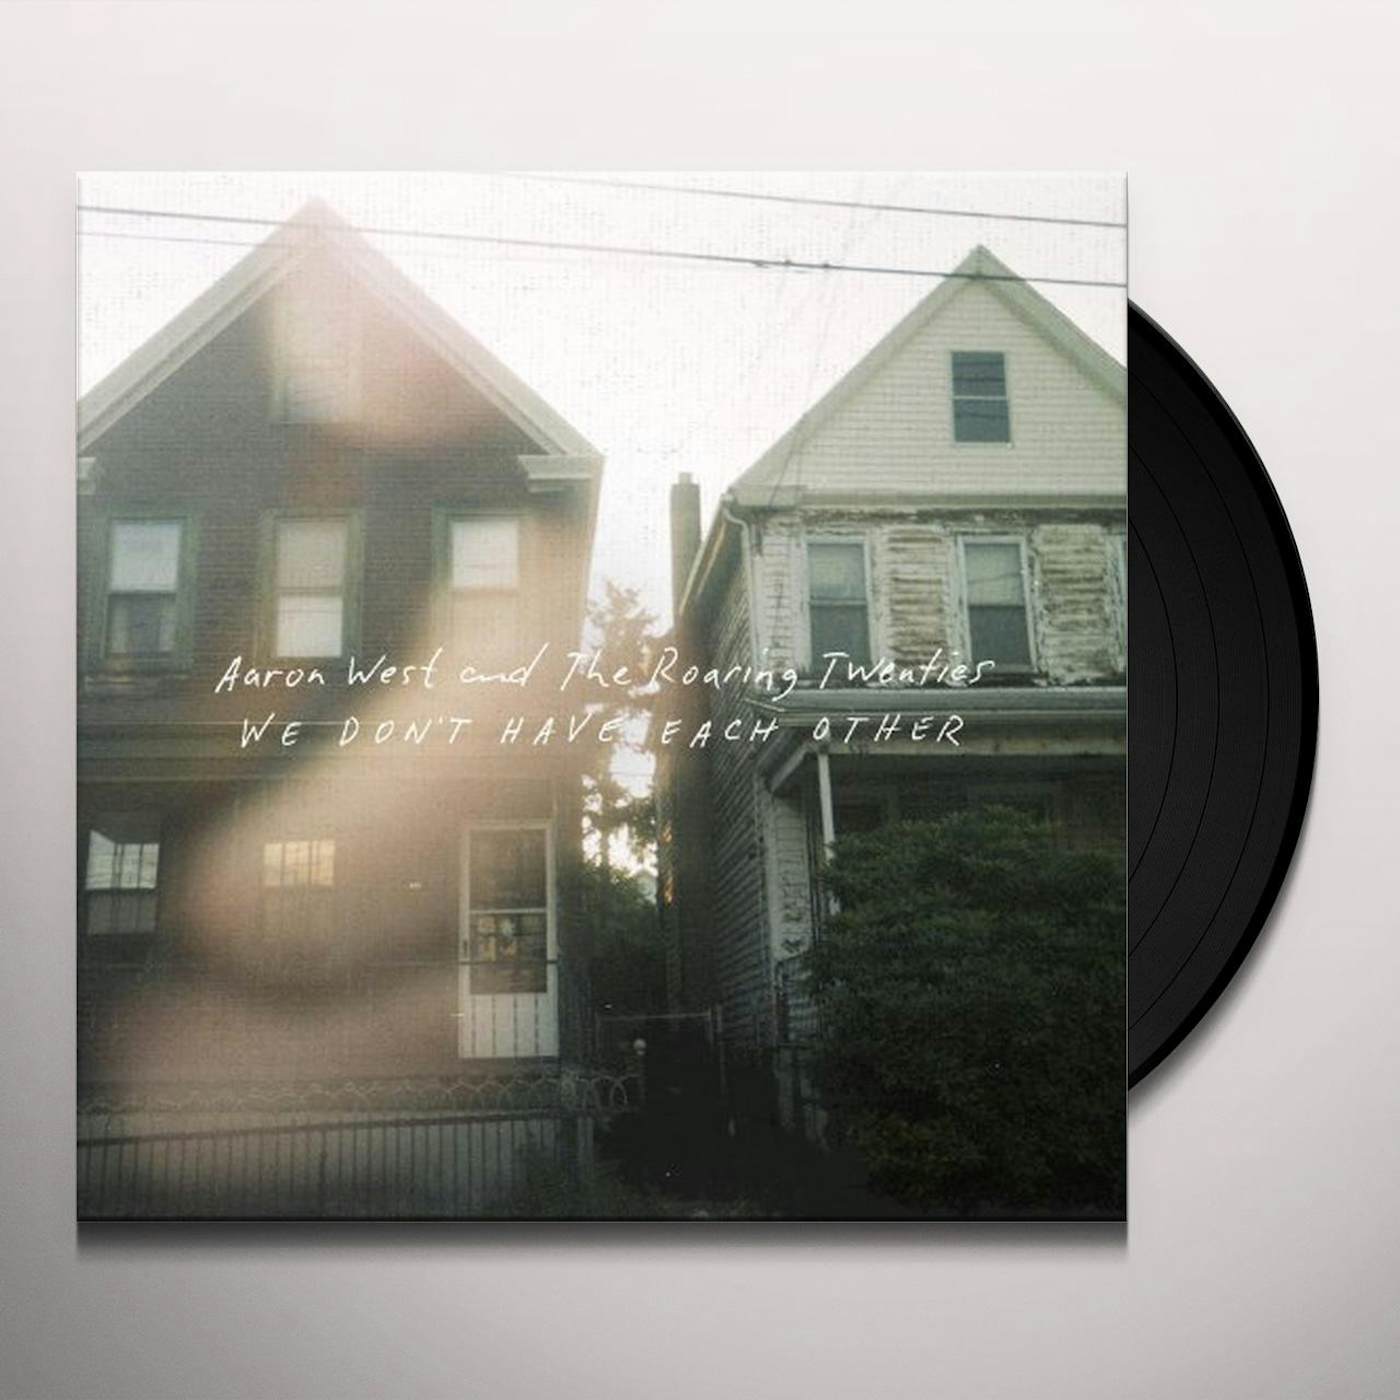 Aaron West and The Roaring Twenties WE DONT HAVE EACH OTHER Vinyl Record